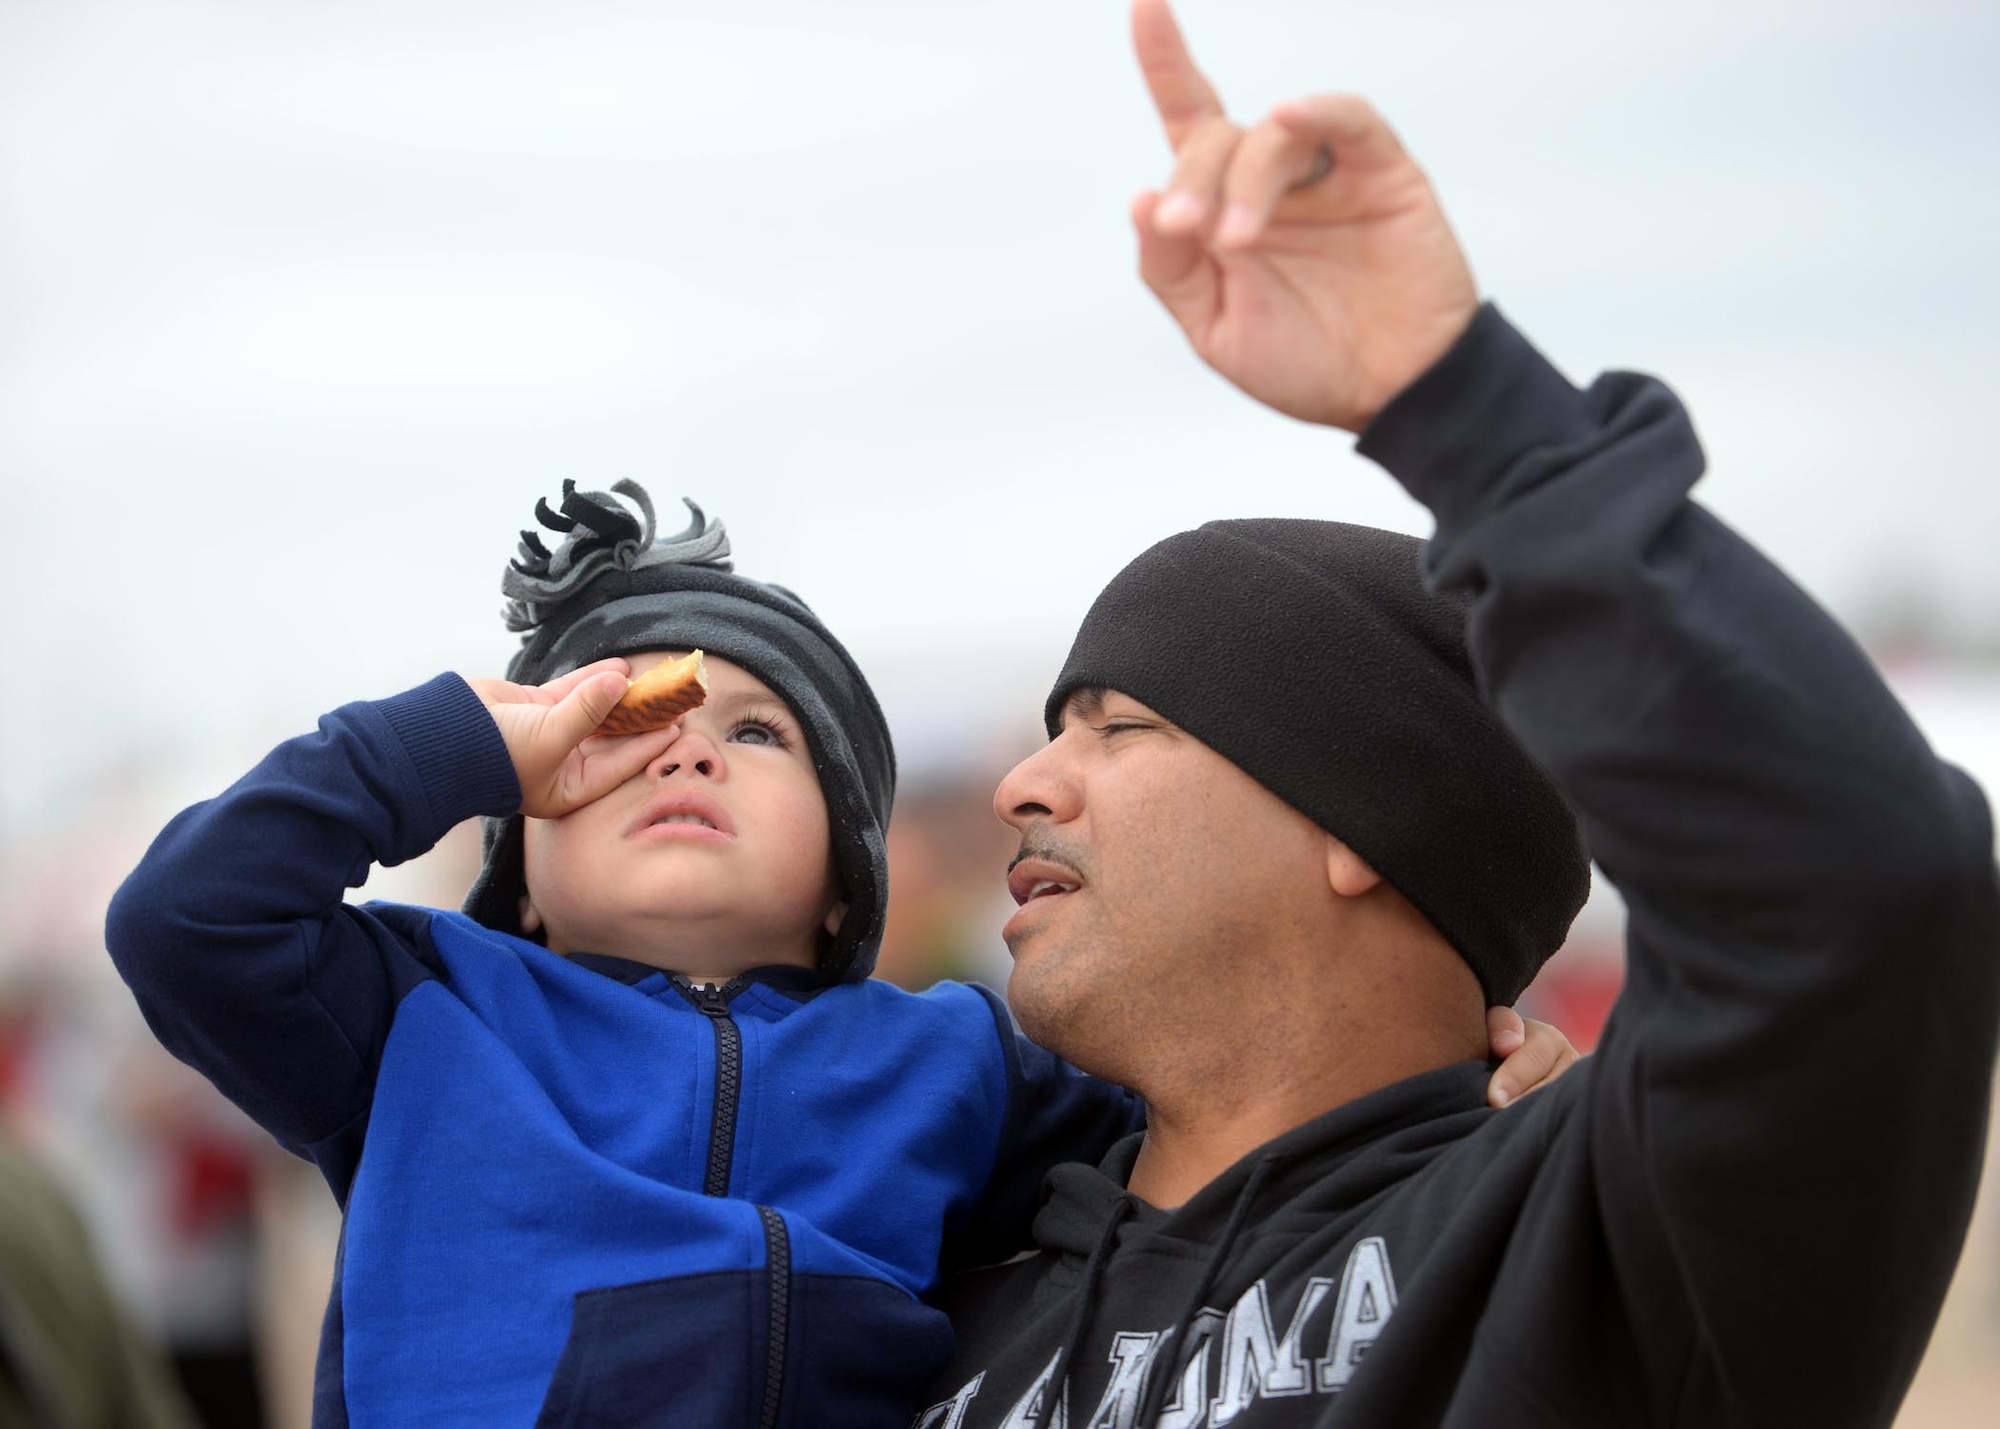 ALTUS AIR FORCE BASE, Okla. – Harby Perez points out the U.S. Air Force Academy Wings of Blue to his son, Jovanni, during the 2014 Wings of Freedom Open House, Sept. 13, 2014. The U.S. Air Force Academy Wings of Blue Parachute Team demonstrated their aerial skills with high speed free falling maneuvers and precision canopy flight. (U.S. Air Force photo by Senior Airman Levin Boland/Released)  